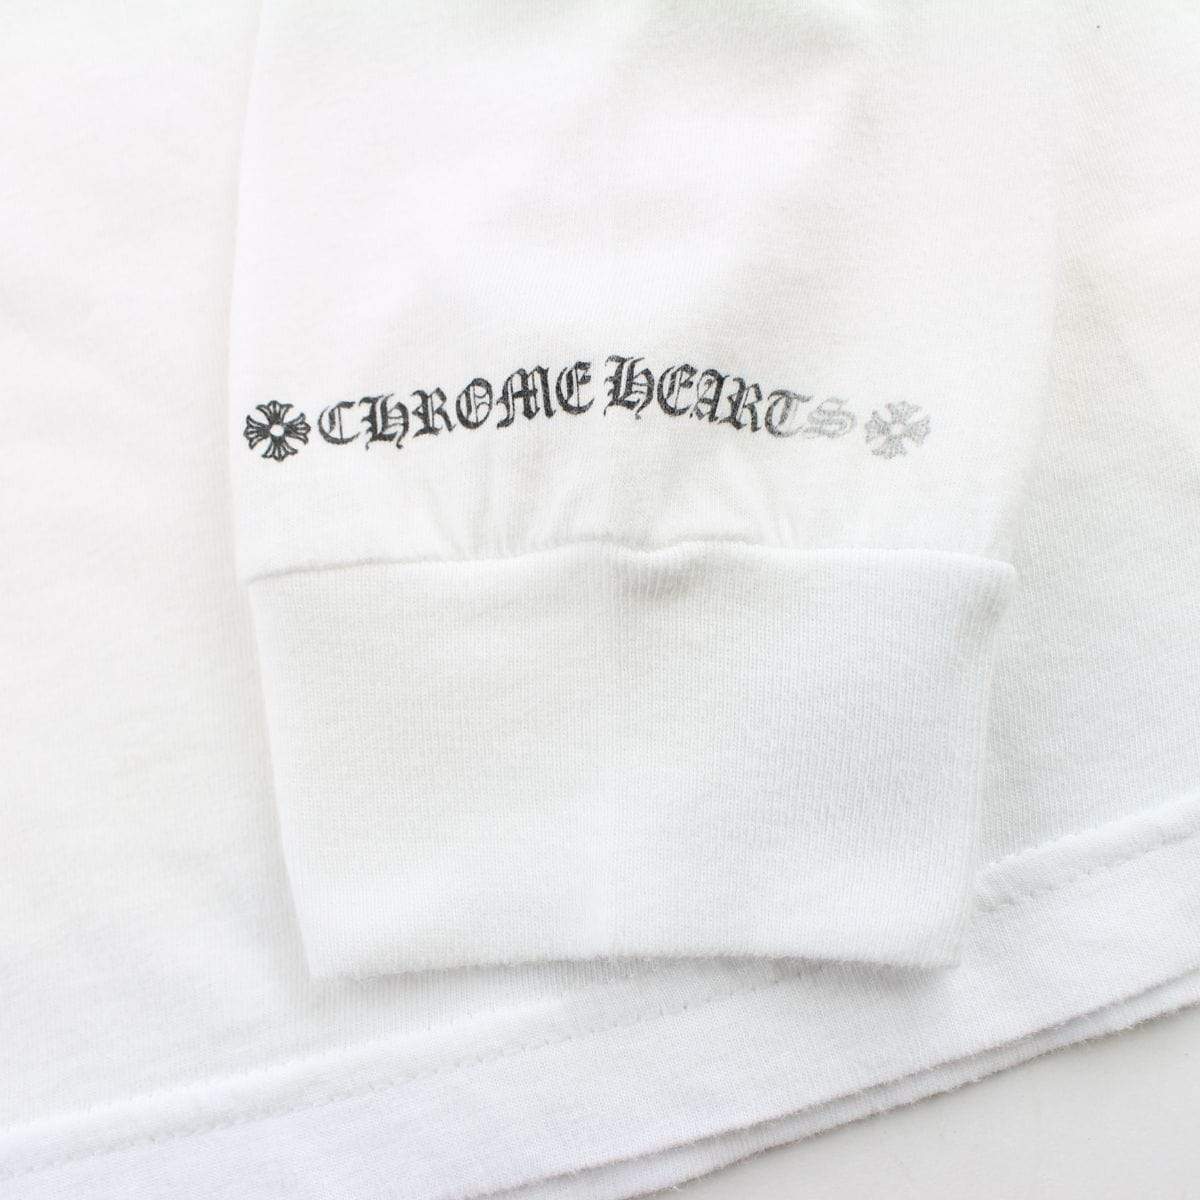 Chrome Hearts Crosses Ls White - SaruGeneral